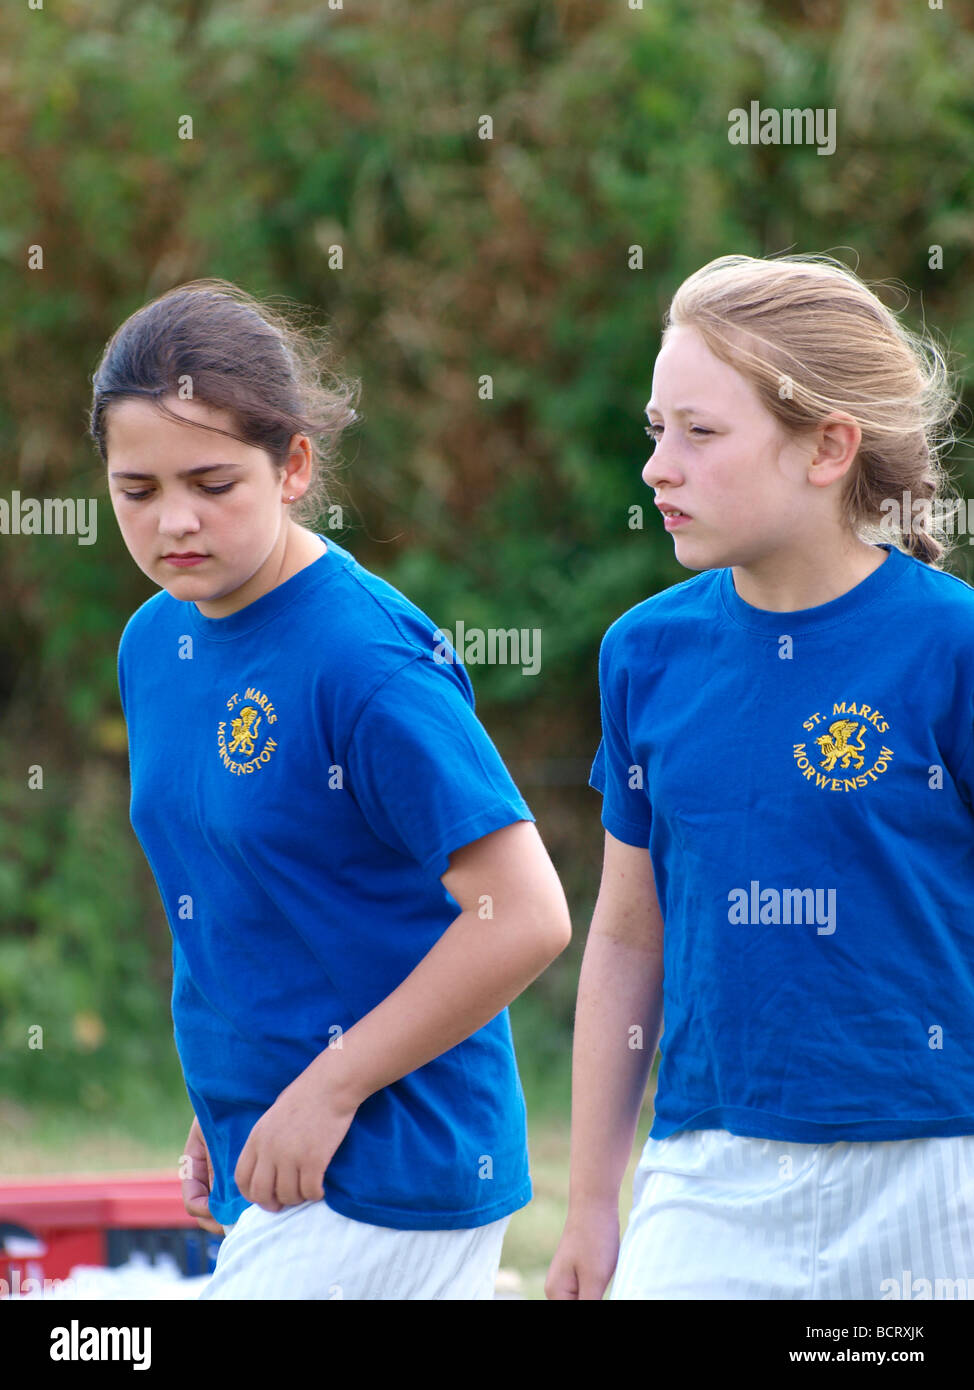 Two young girls preparing to start a running race Stock Photo